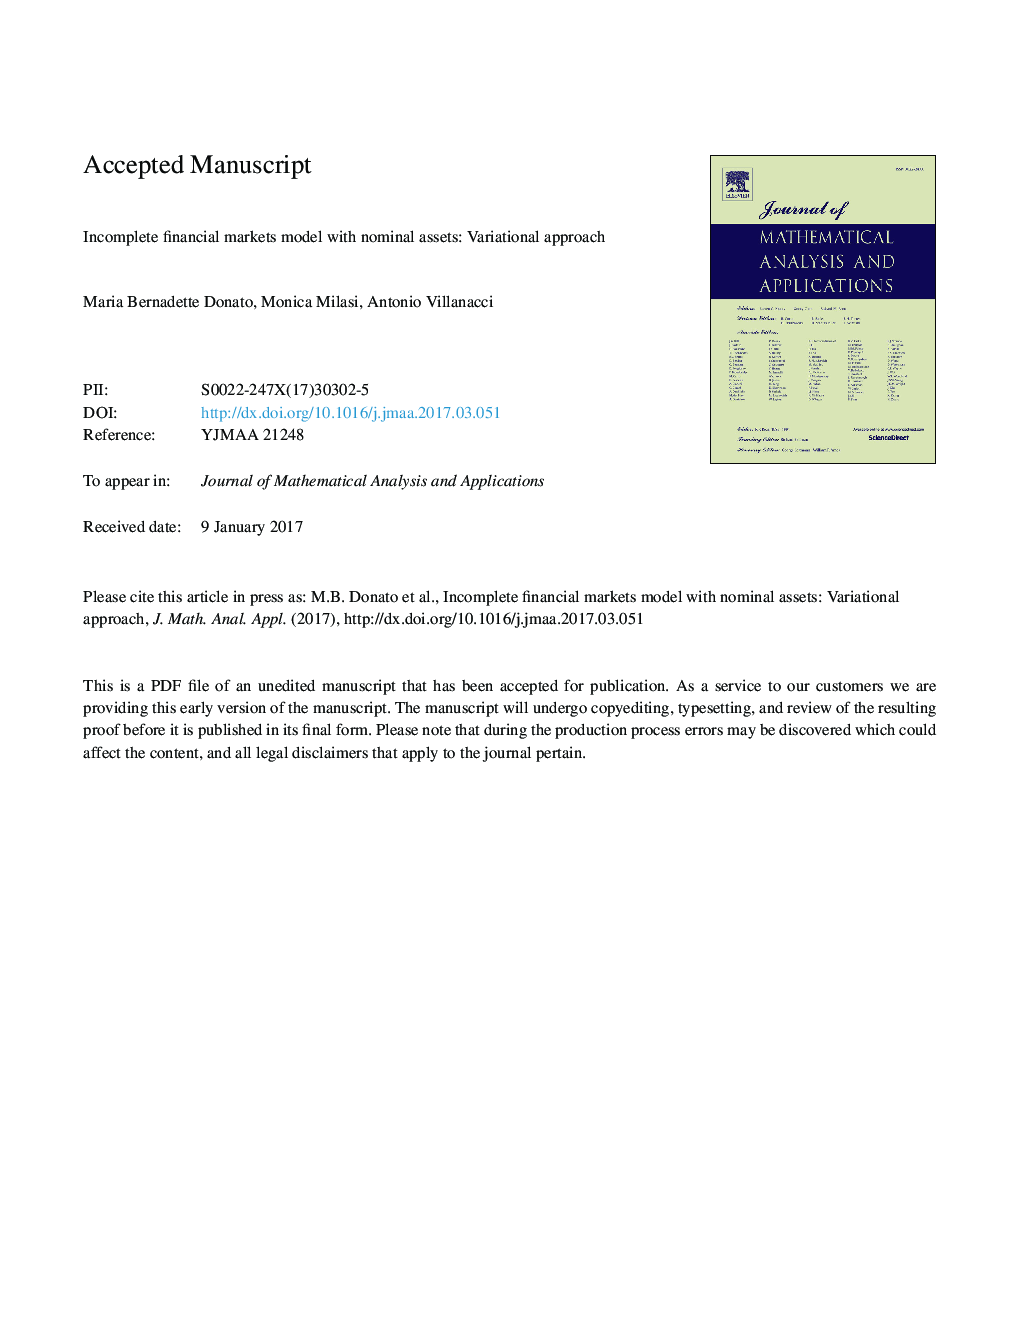 Incomplete financial markets model with nominal assets: Variational approach